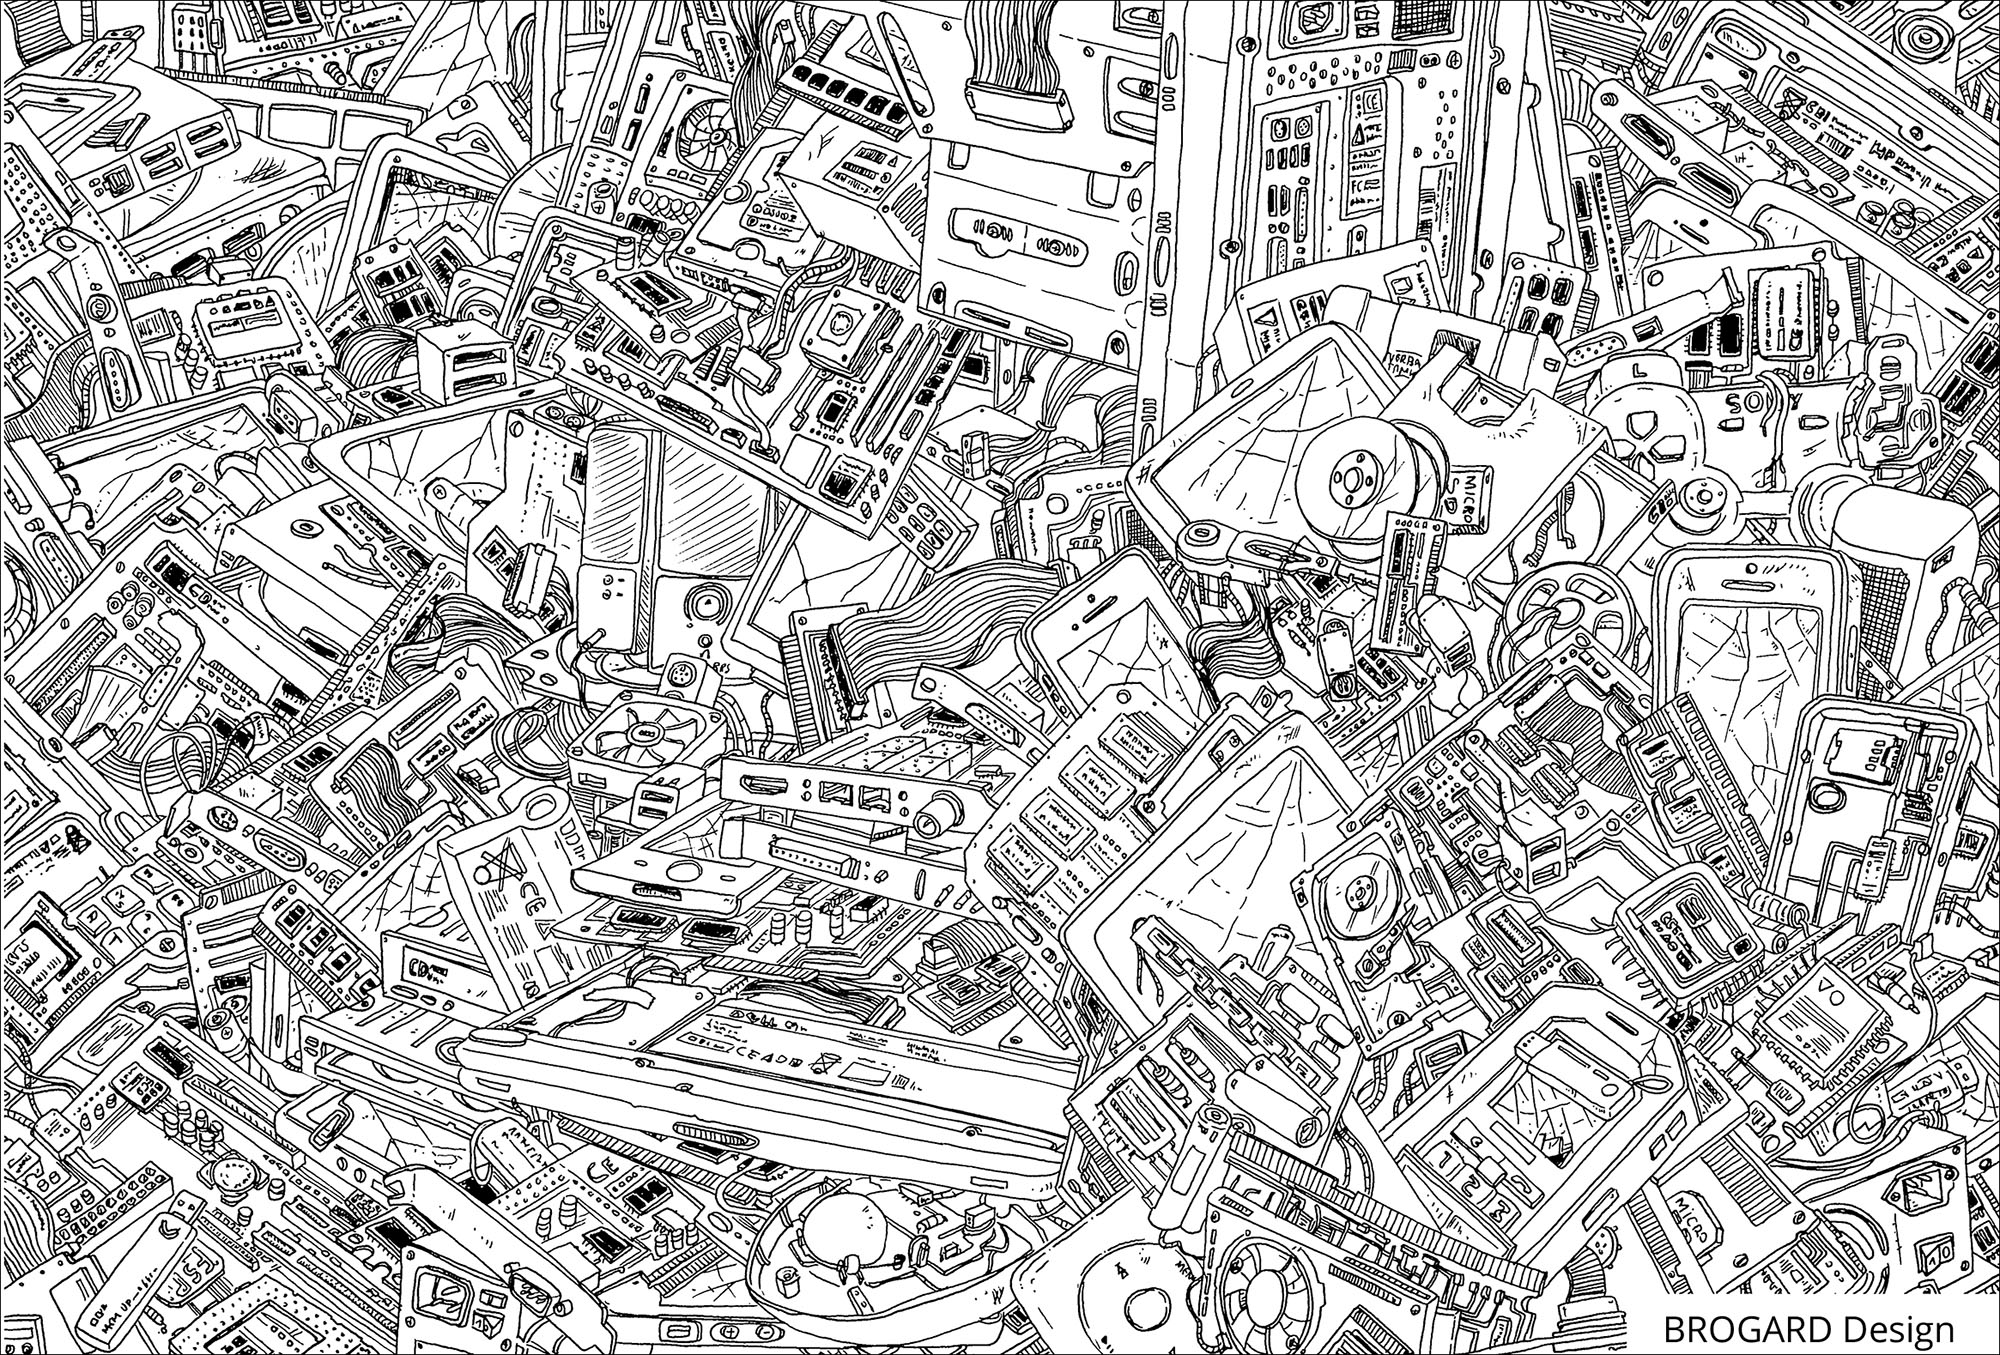 A lot of details to color in this drawing full of electronic elements from computers, Artist : Frédéric Brogard